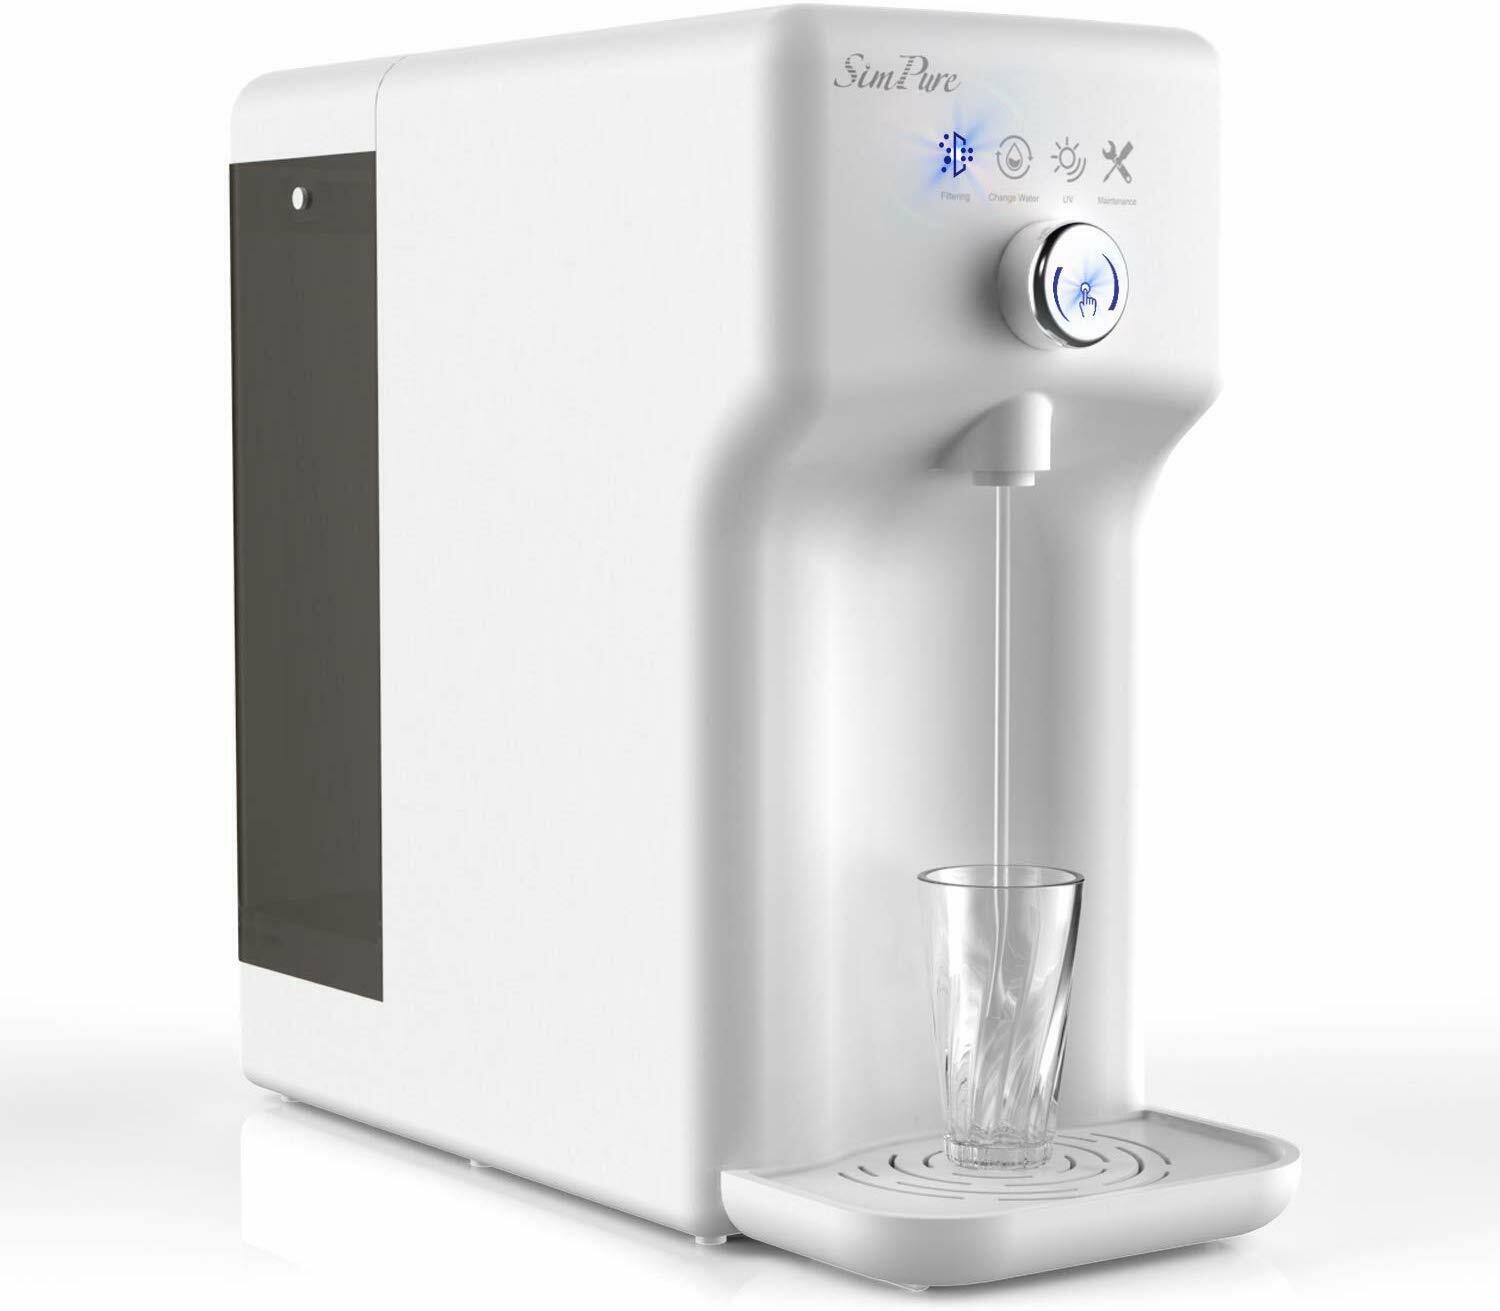 UV Countertop Water Filter RO System Water Clean Water Purification Drinking 5L eBay